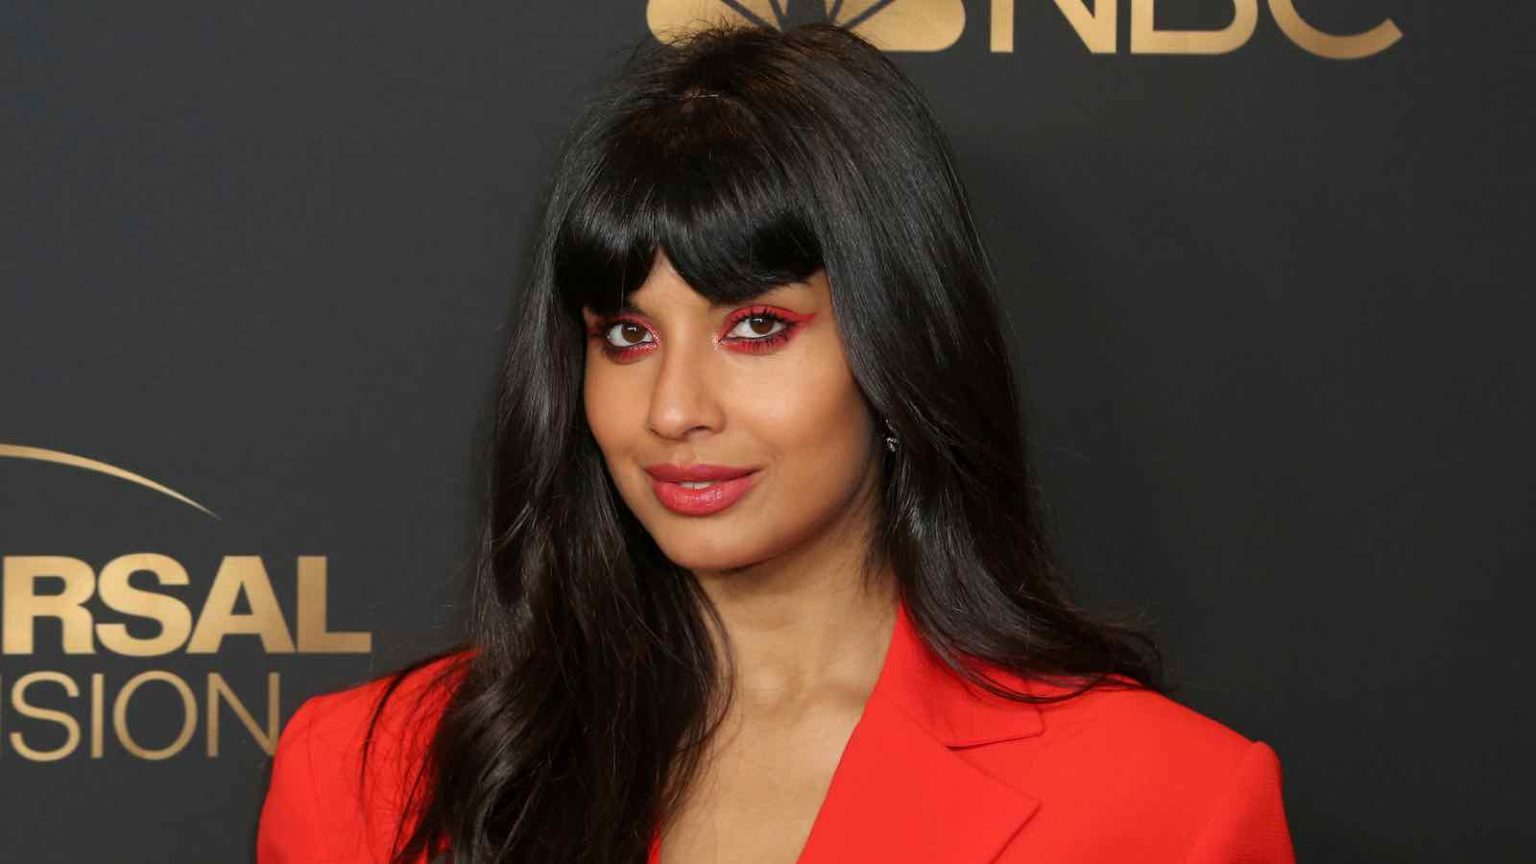 'Legendary' will give ballroom stars a chance to vogue their way to a trophy and a cash prize. Let's spill all the tea on Jameela Jamil and the feud.